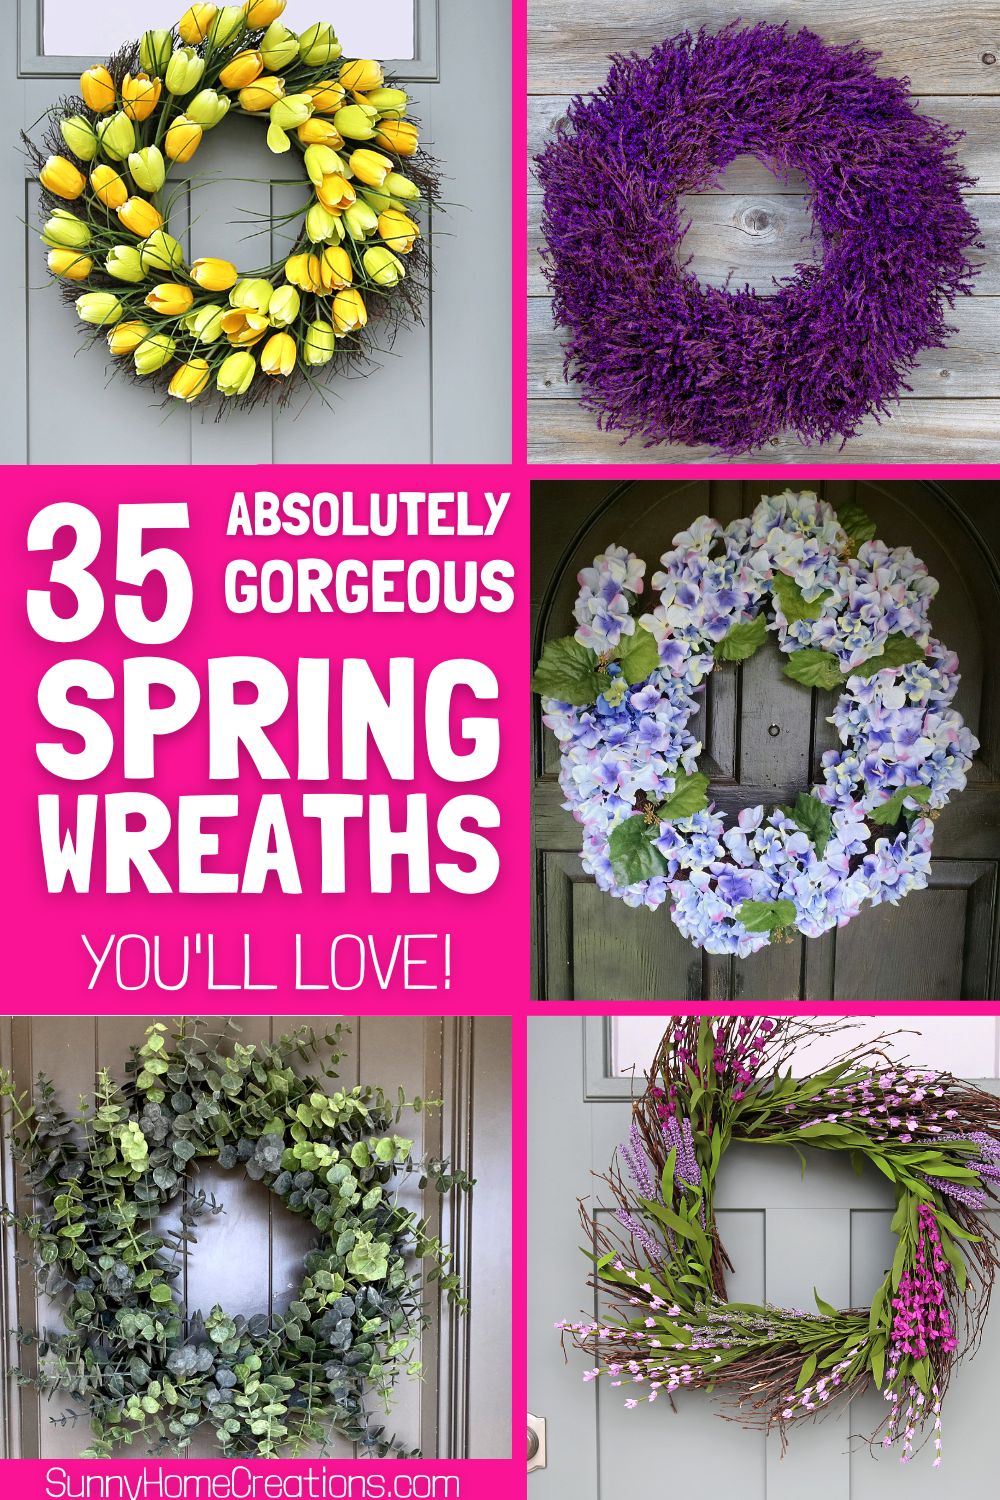 Pin image: collage of wreaths with the words "35 absolutely gorgeous spring wreaths you'll love".